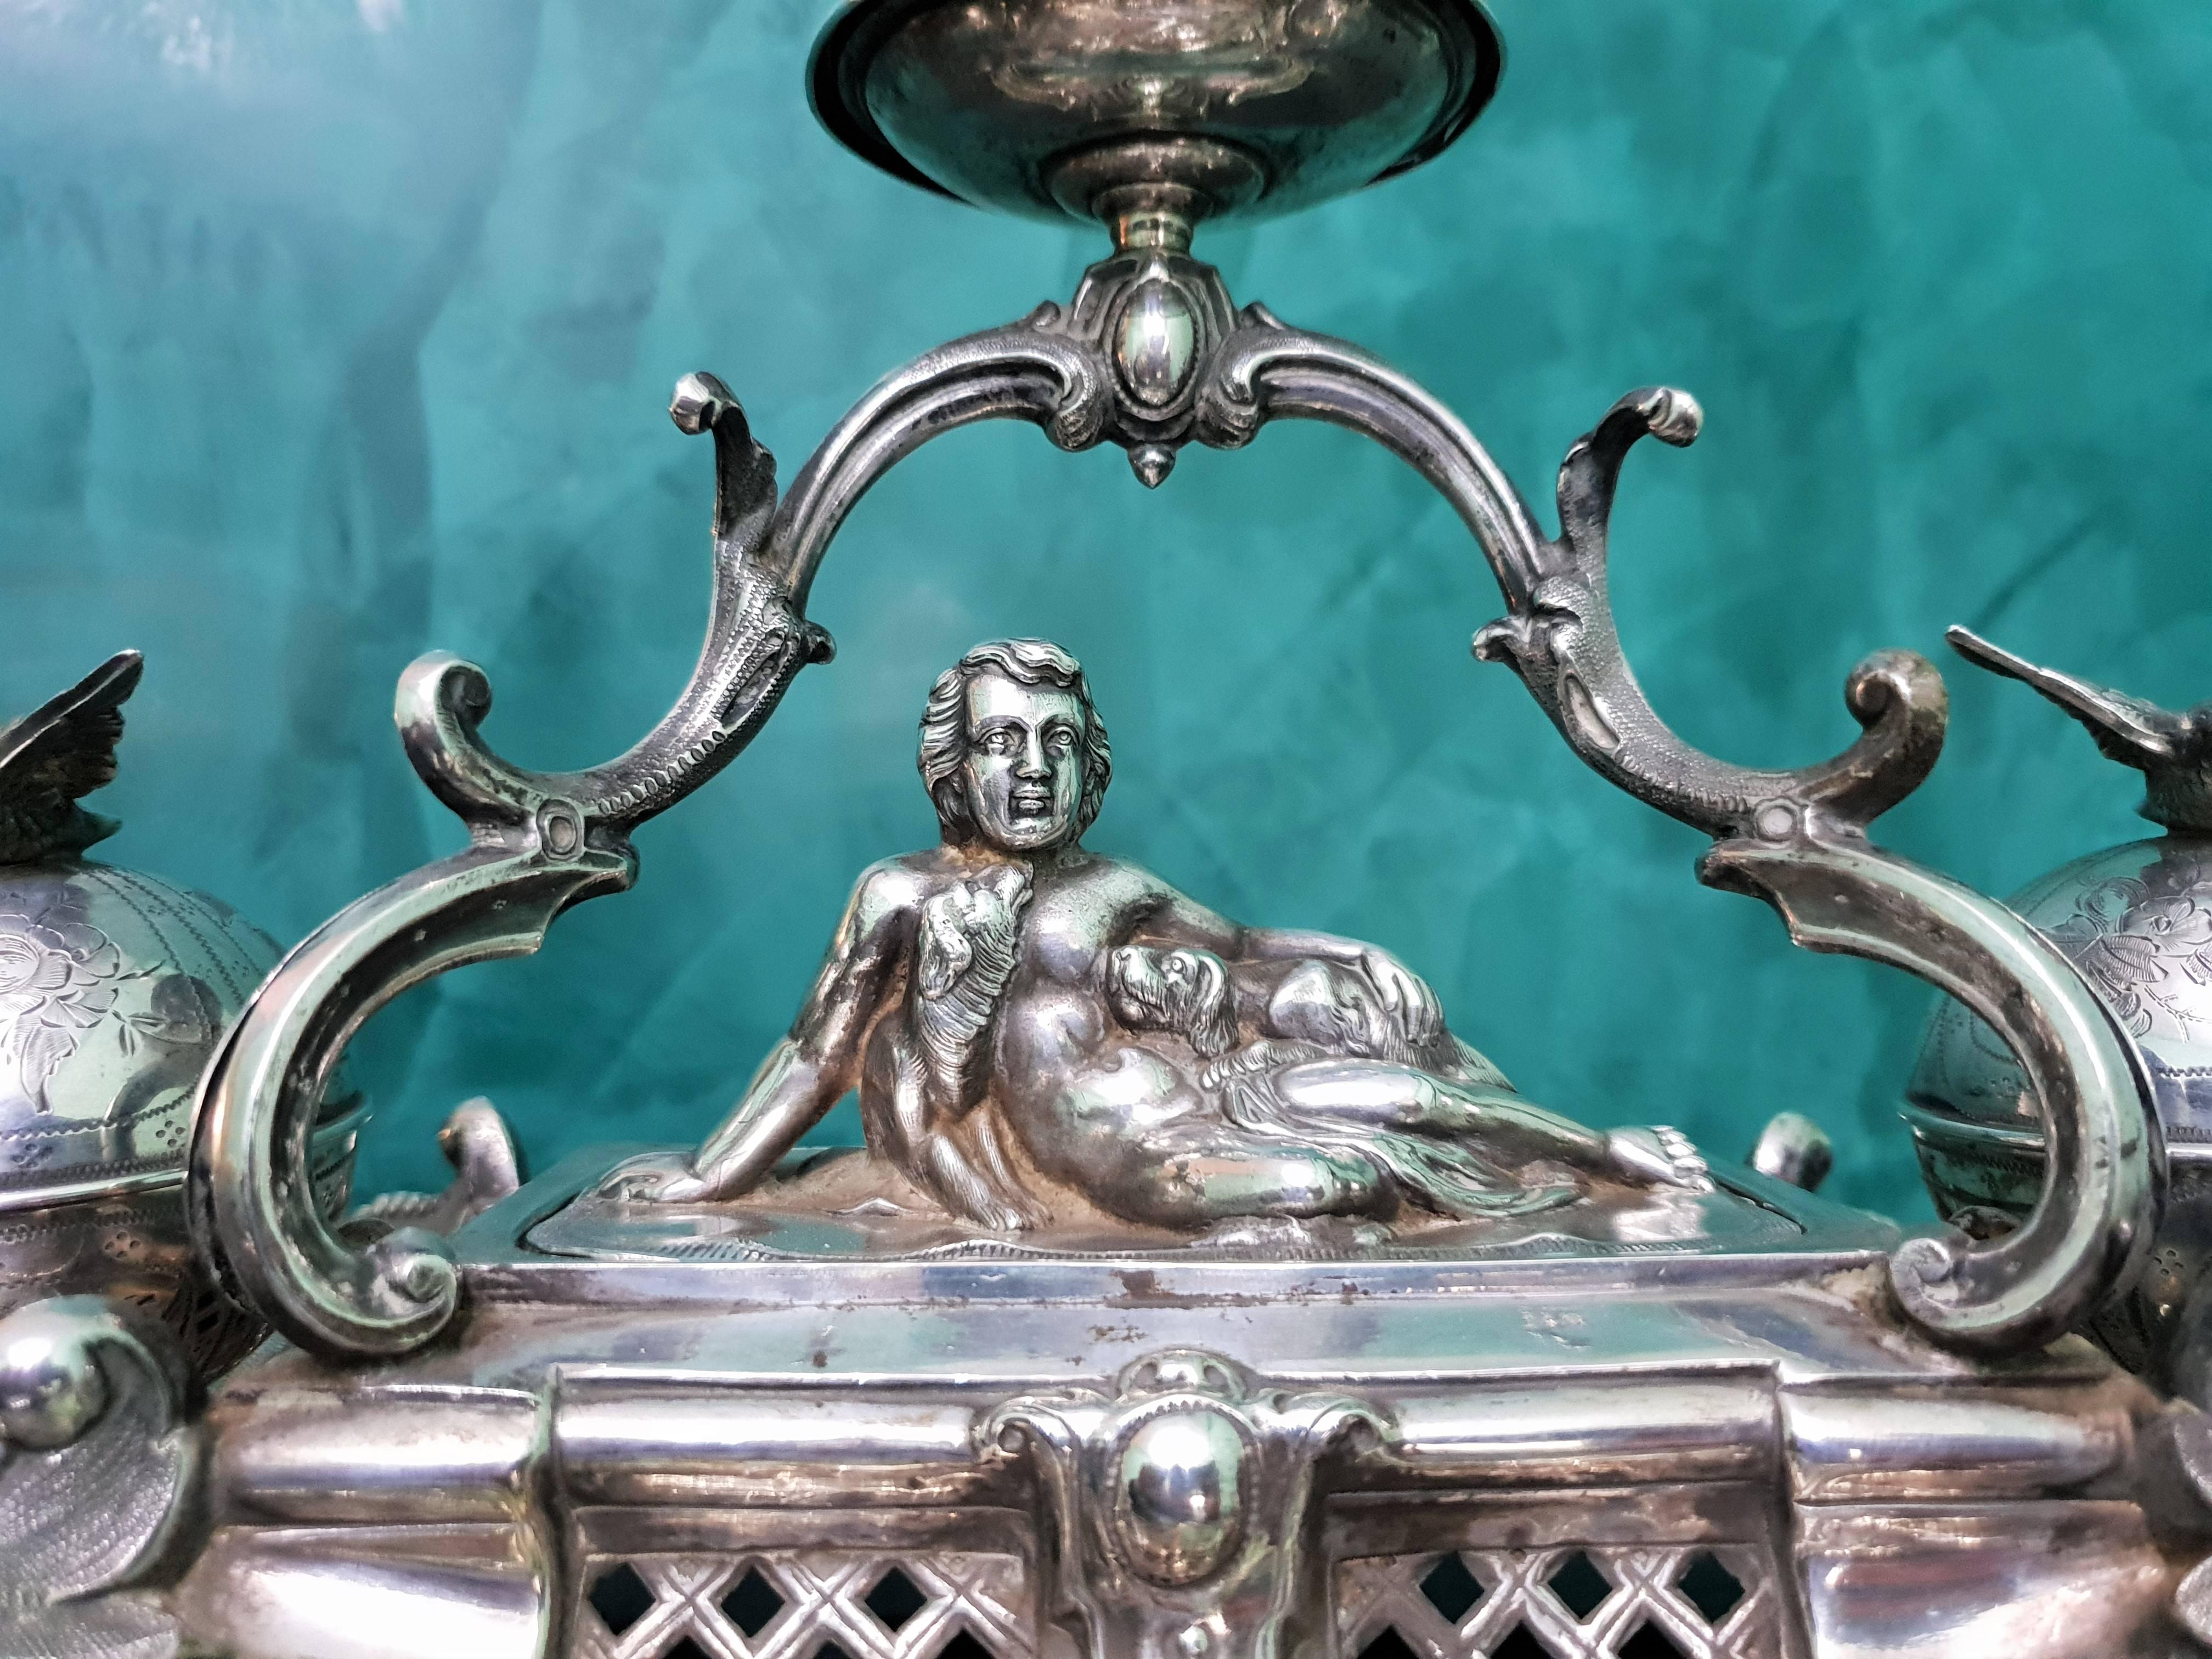 Rare impressive silver ink stand realised by Dominikus Kott (Silberwaren Fabrik, Kott, Walter, Foster) from Schwabisch Gmund (Stuttgart, Germany). Dated circa 1820.
Embossed and engraved by hand and composed by multiple removable parts like the